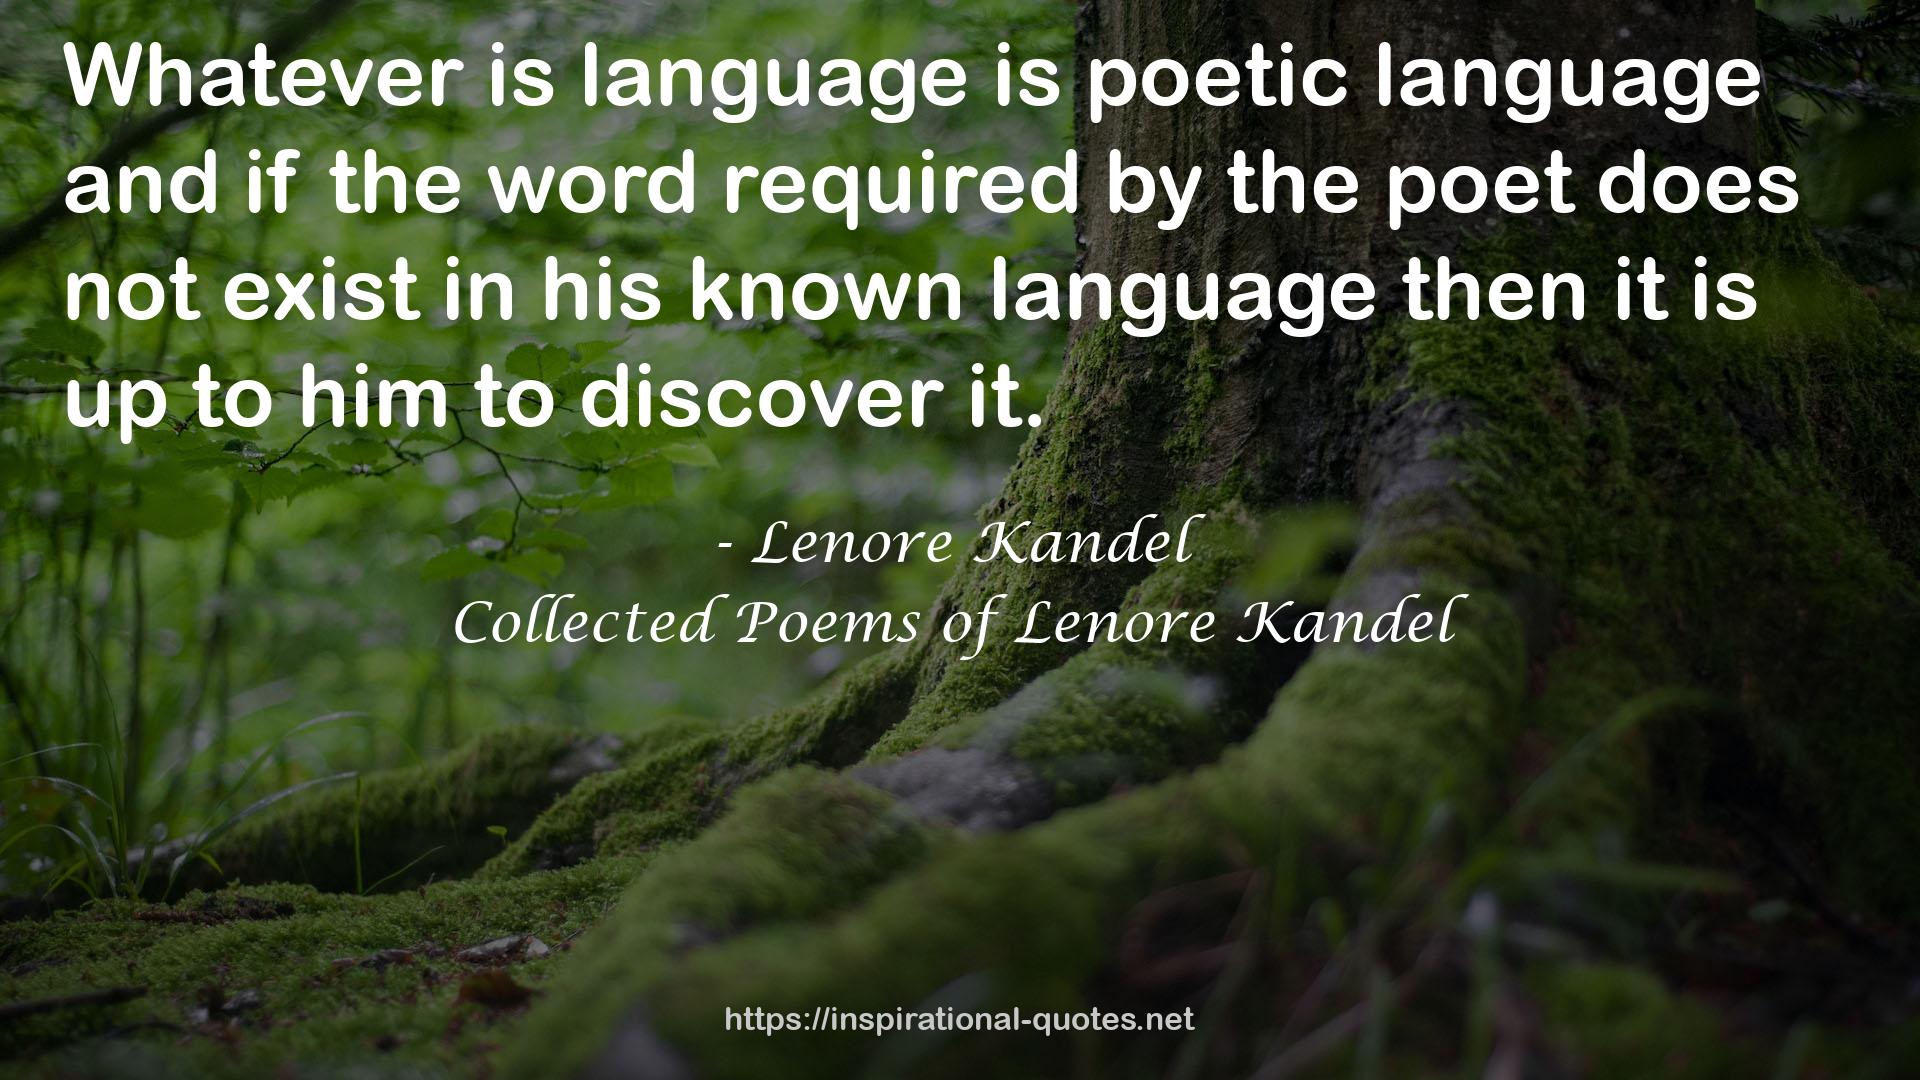 Collected Poems of Lenore Kandel QUOTES